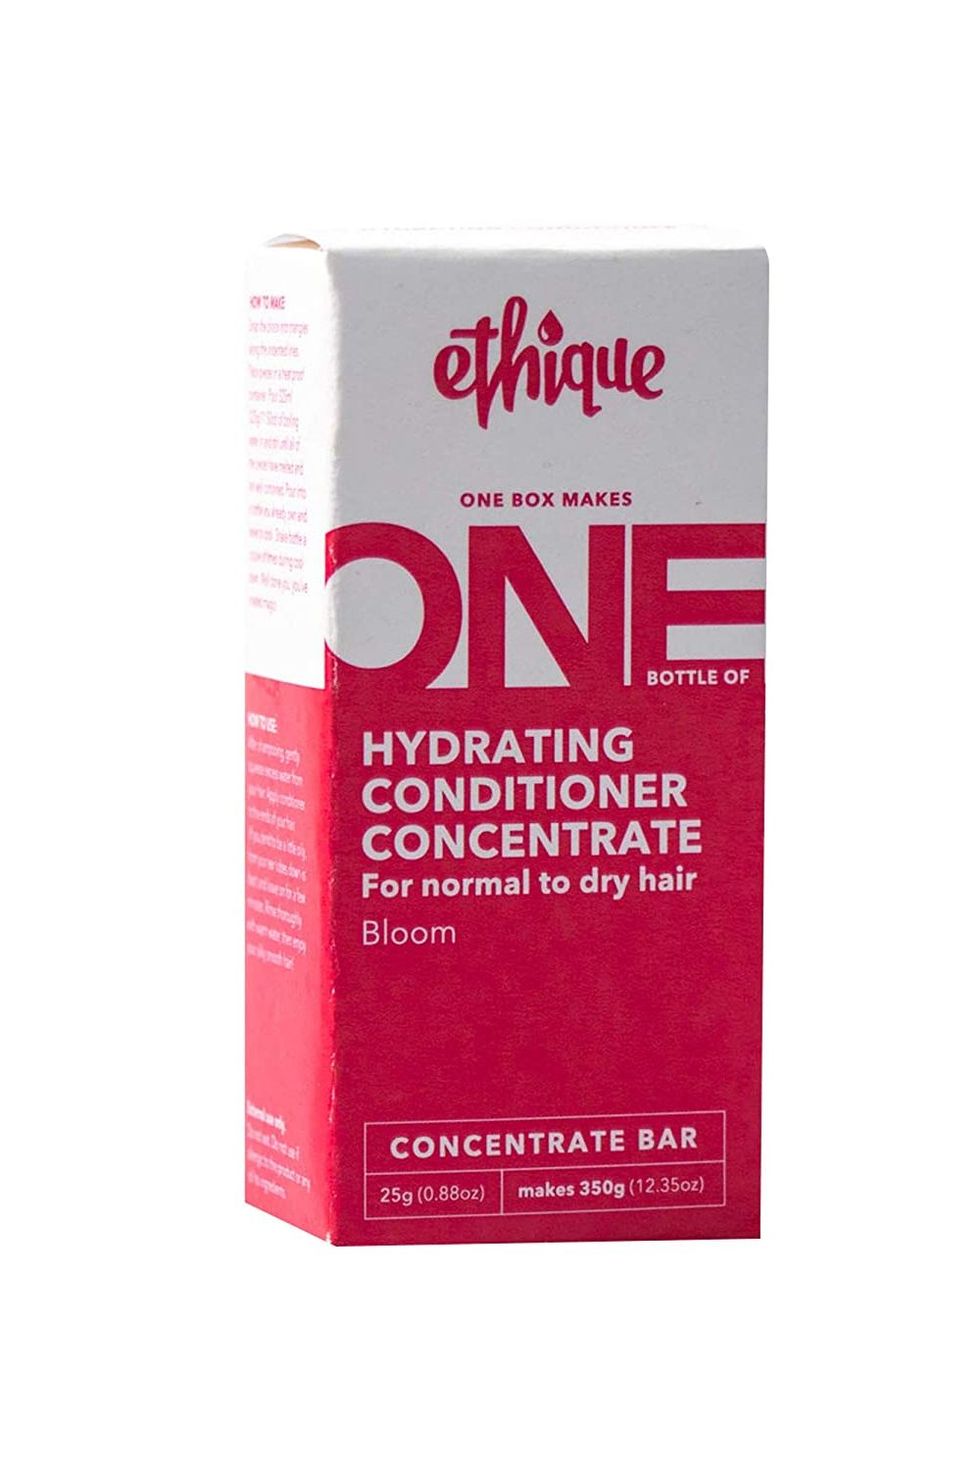 Ethique Hydrating Conditioner Concentrate Bar